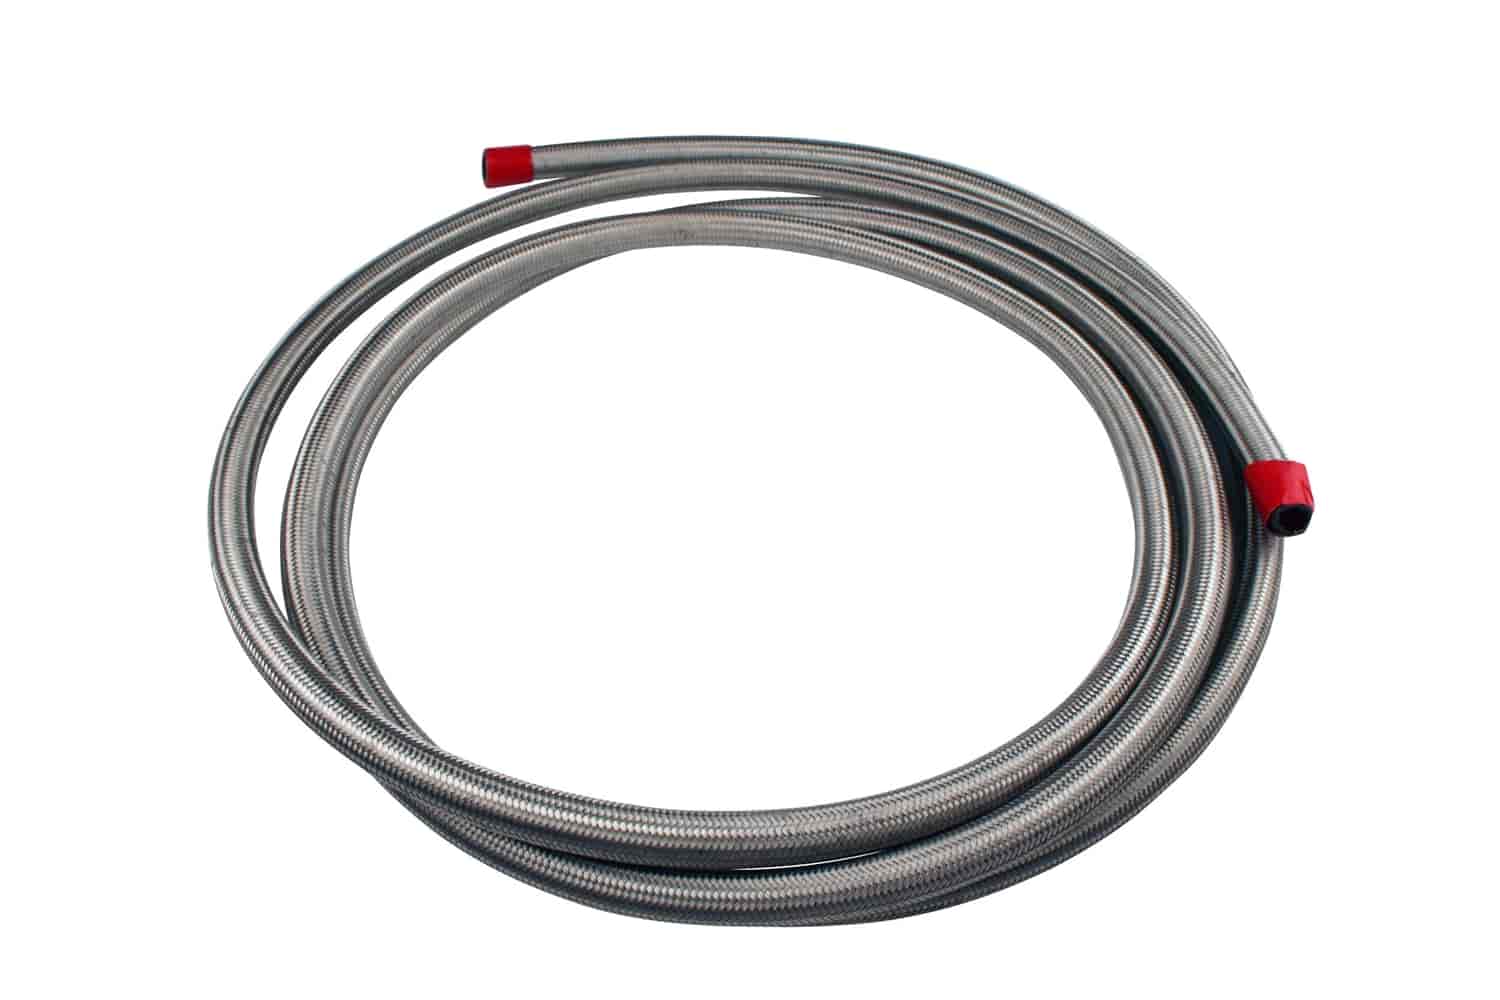 Braided Stainless Steel Fuel Hose -8AN x 12